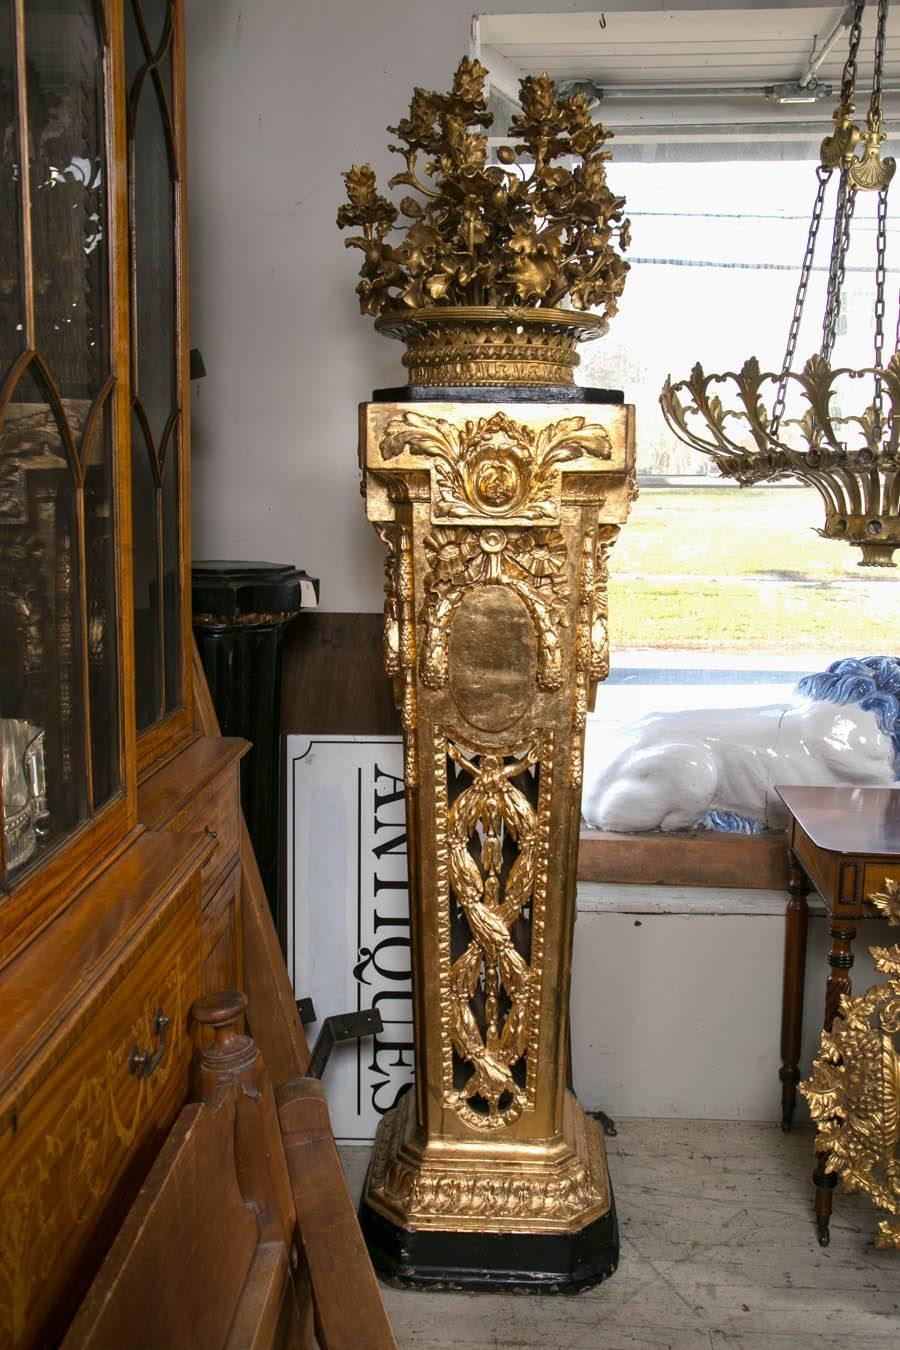 This pair we believe came from the Plaza Hotel in New York City, but we have no documentation to that account.
They have been regilded.
The base is carved wood. The top flower basket is of gilt metal, holding 12 lights each.
Please note the